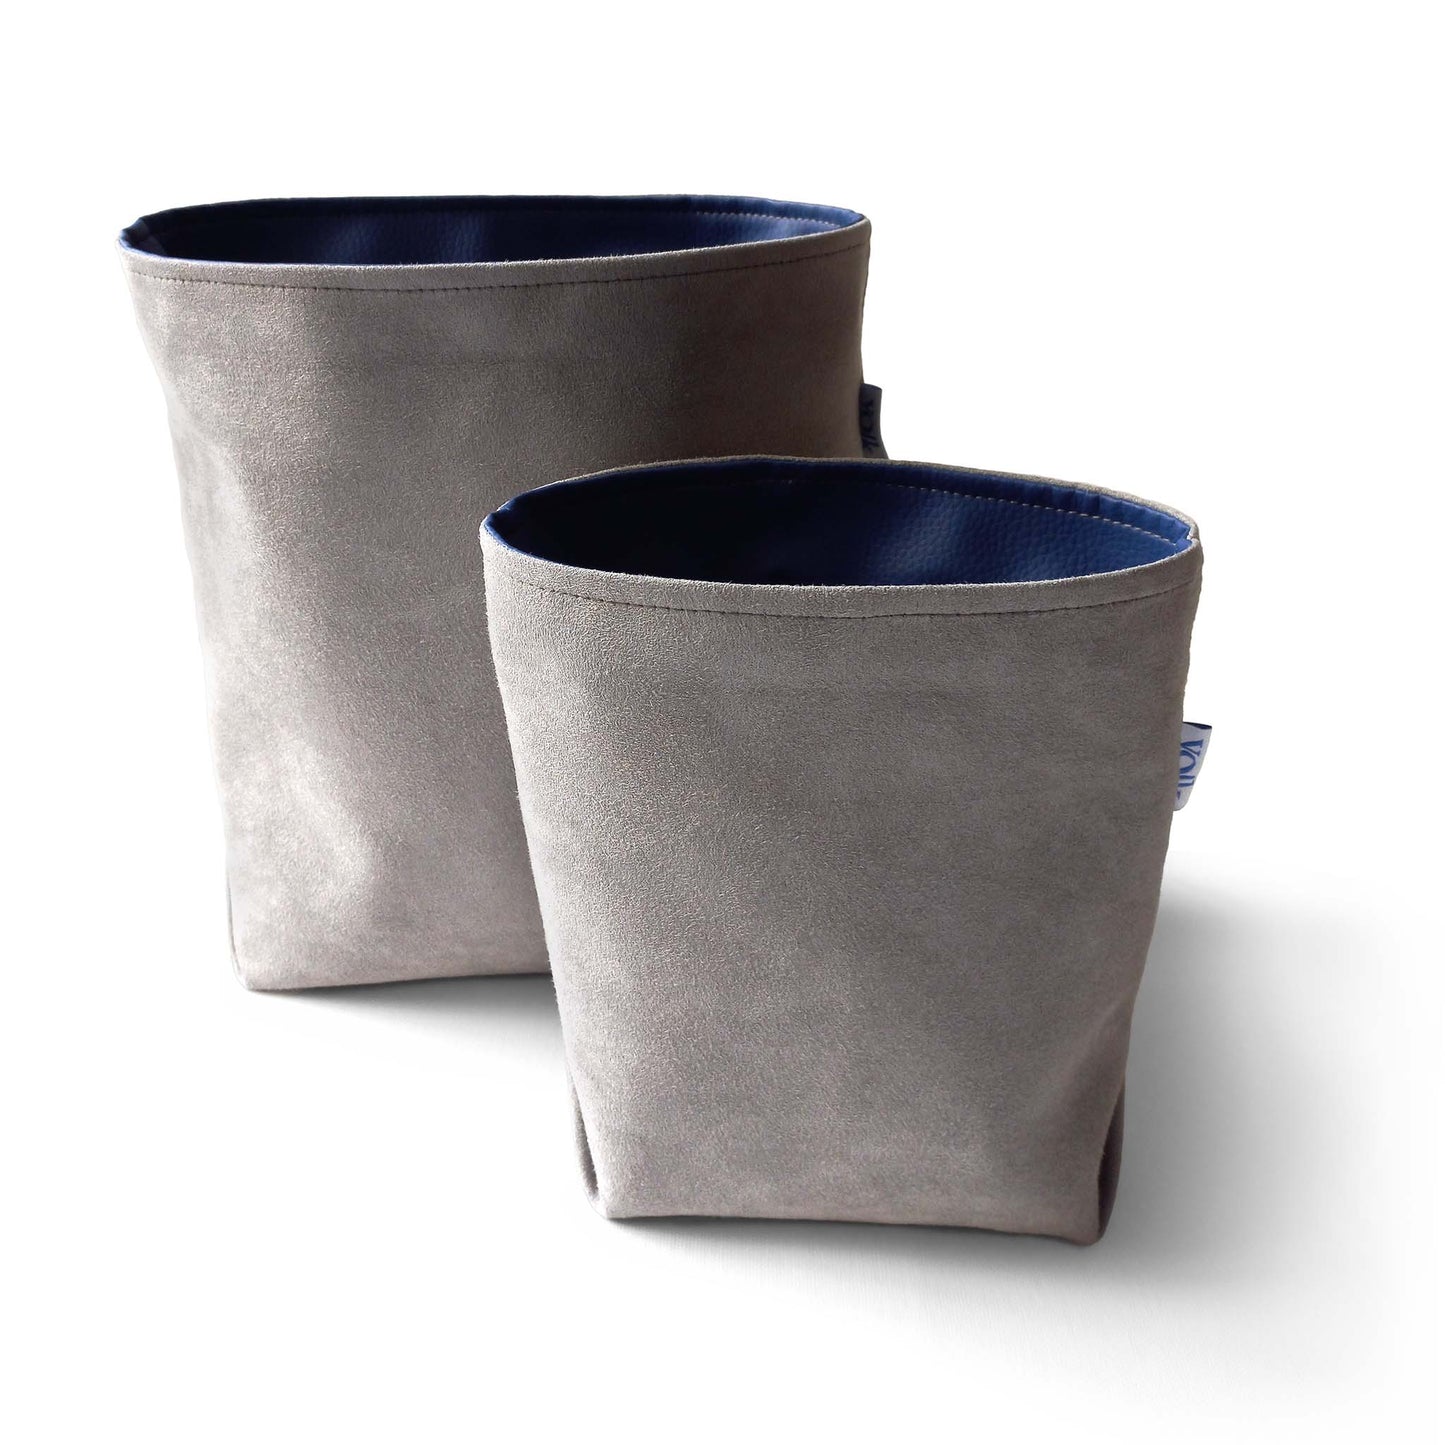 Set of two storage baskets in gravel green colour, front view